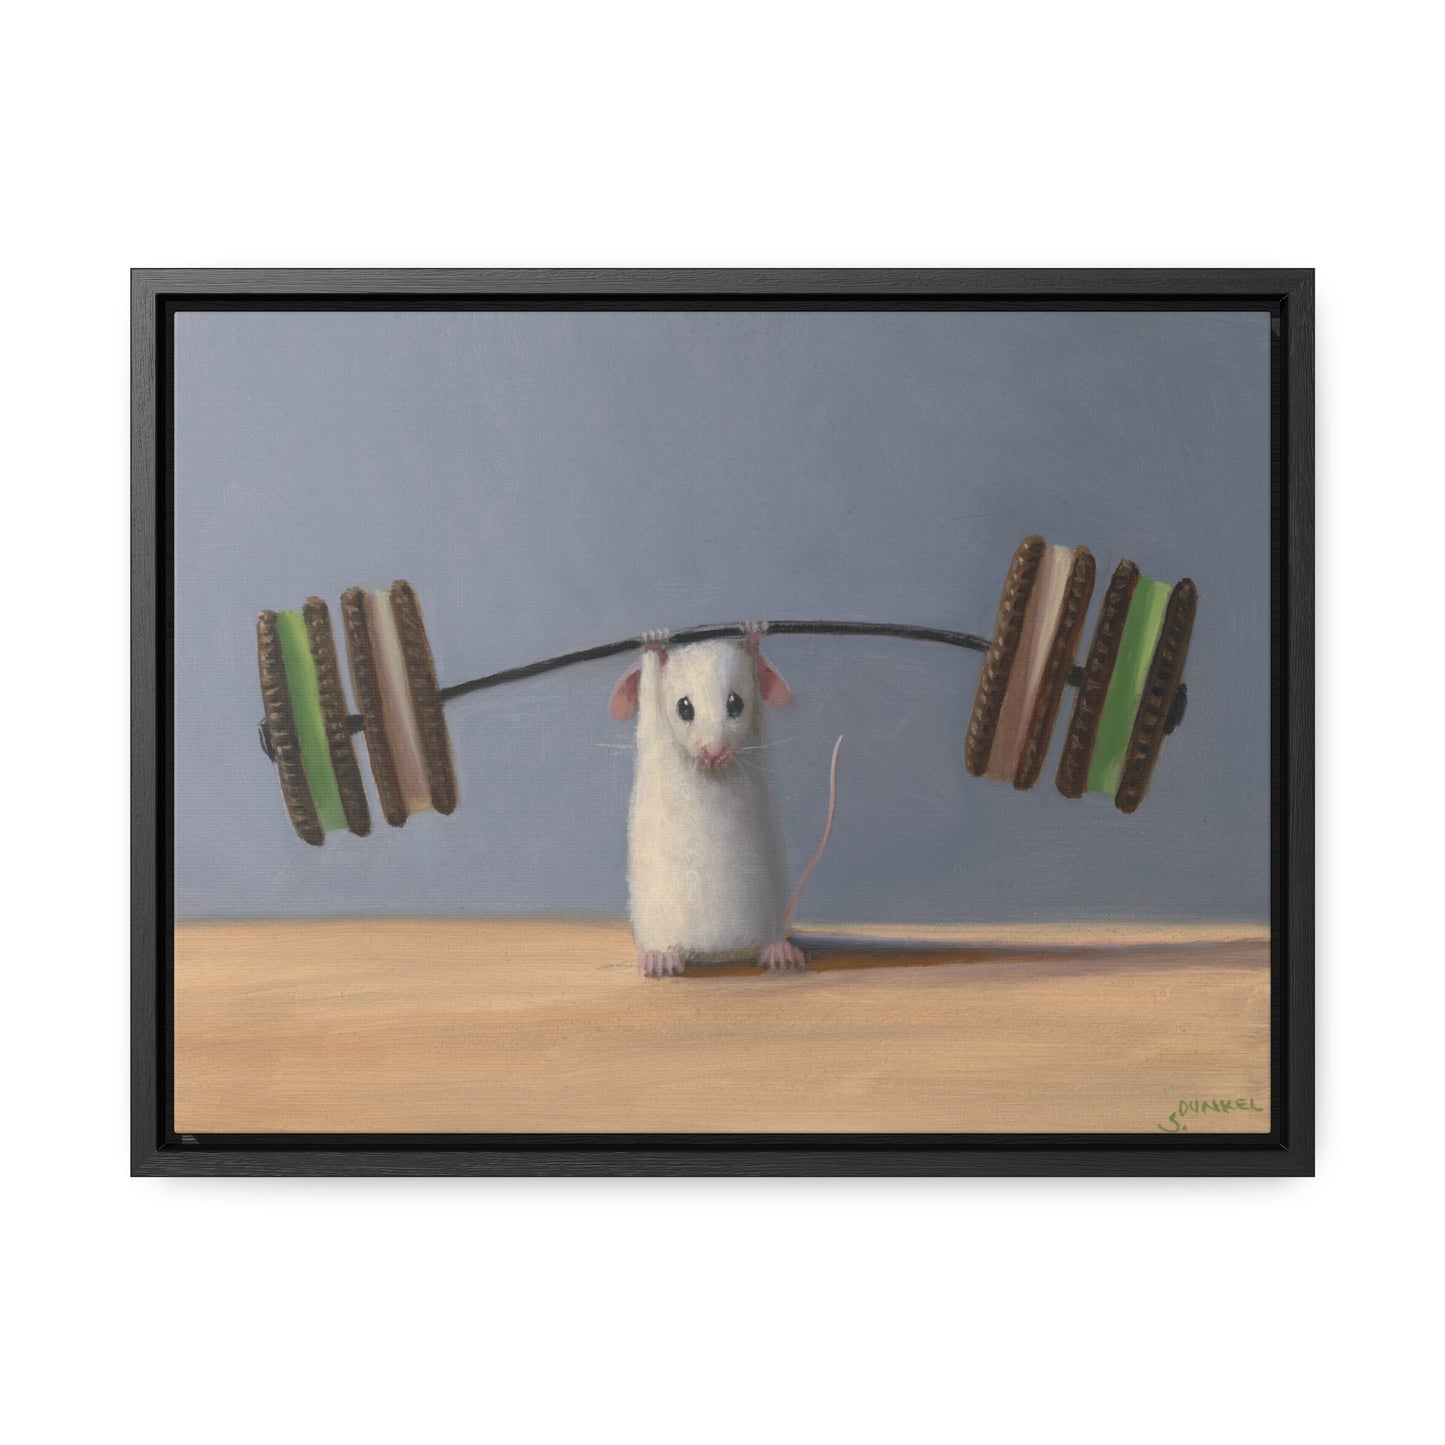 Stuart Dunkel: "Working Out" - Framed Canvas Reproduction